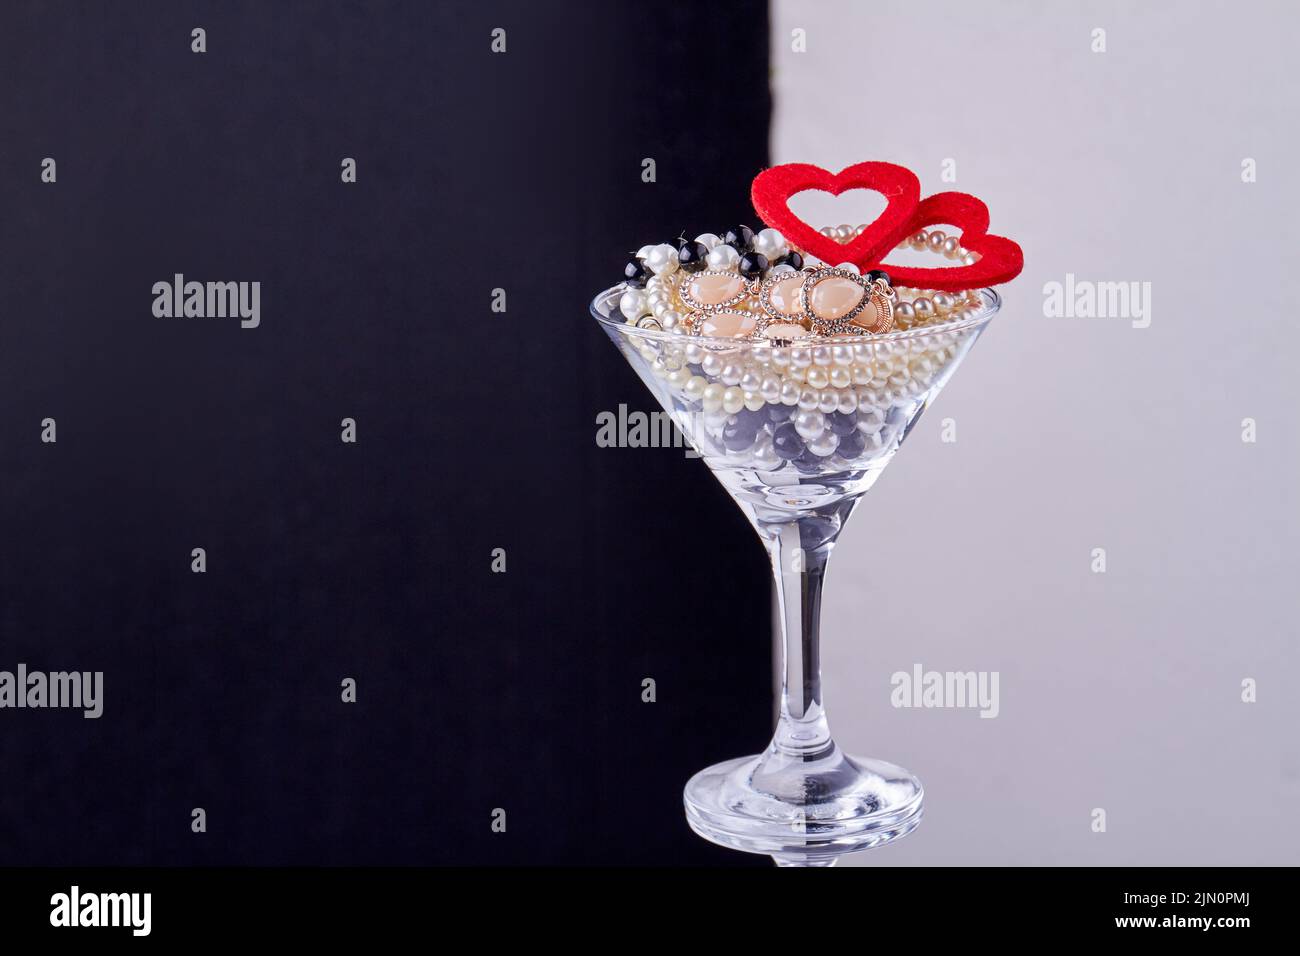 Cocktail glass with jewelry and hearts. Black and white background. Stock Photo